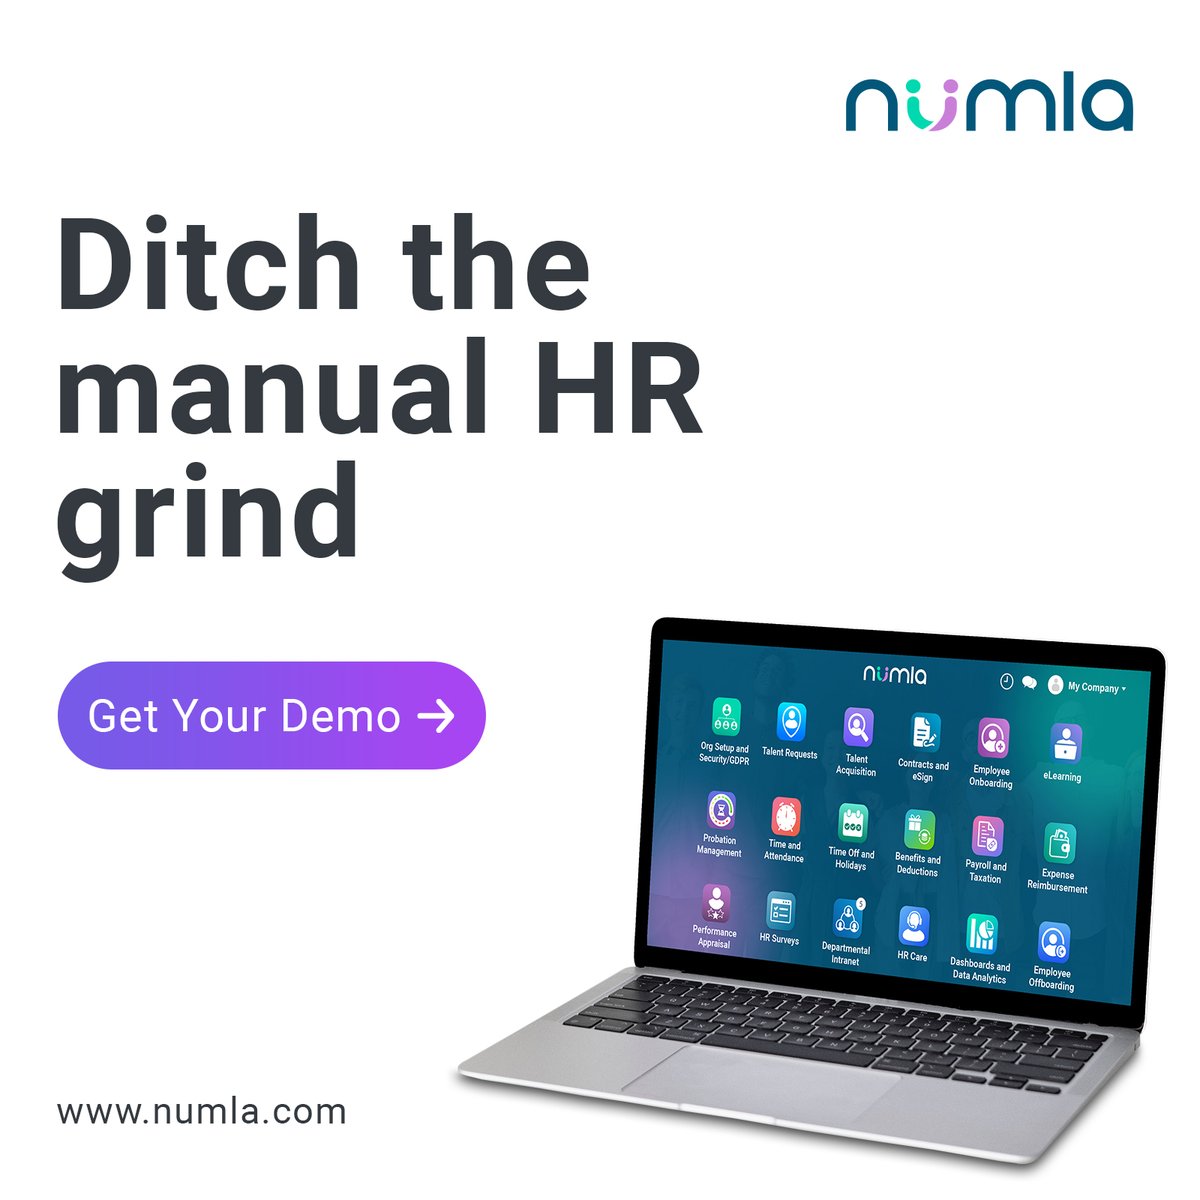 Don't let manual HR processes slow you down. Numla HR is here to revolutionize the way you manage HR. Book your demo today and experience the power of automation.

numla.com/contact-us

#HRtech #HRsystem #HRautomation